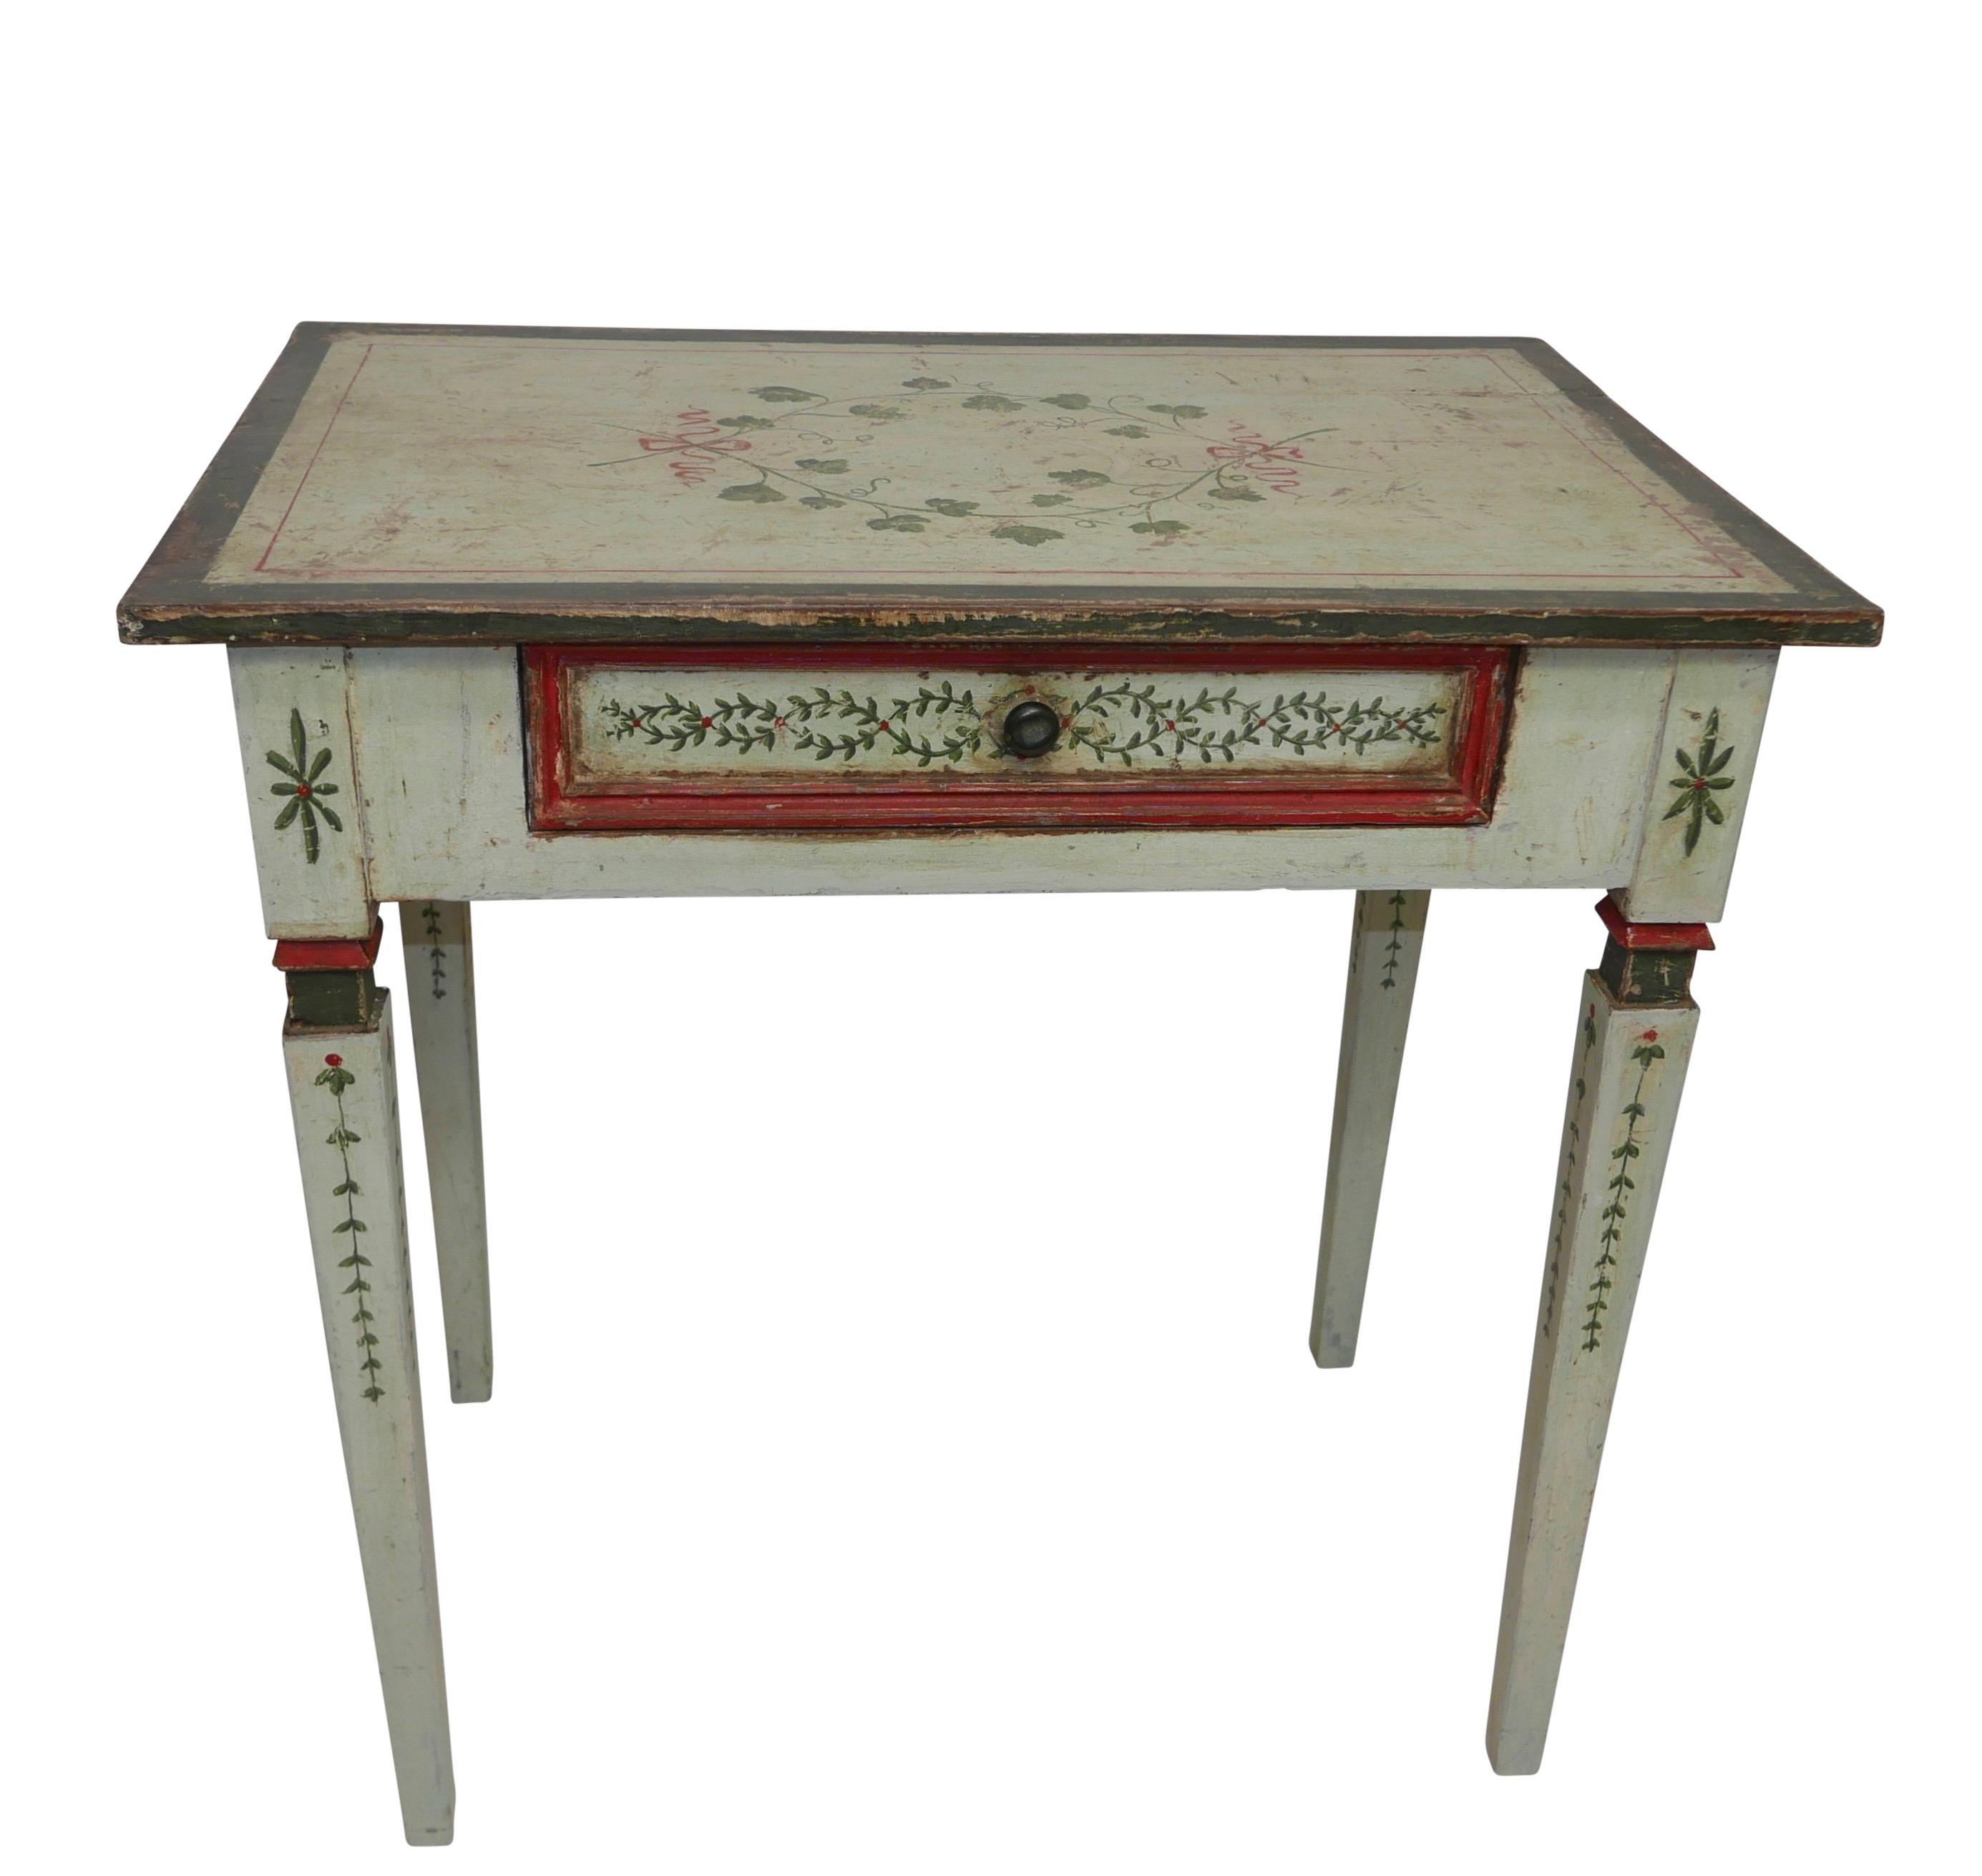 A pale green painted writing table, the top painted with ribbon tied Ivy vines above an apron painted with intertwined strands of leaves and red berries, having a single center drawer and standing on square tapering legs,
Northern Italian, circa